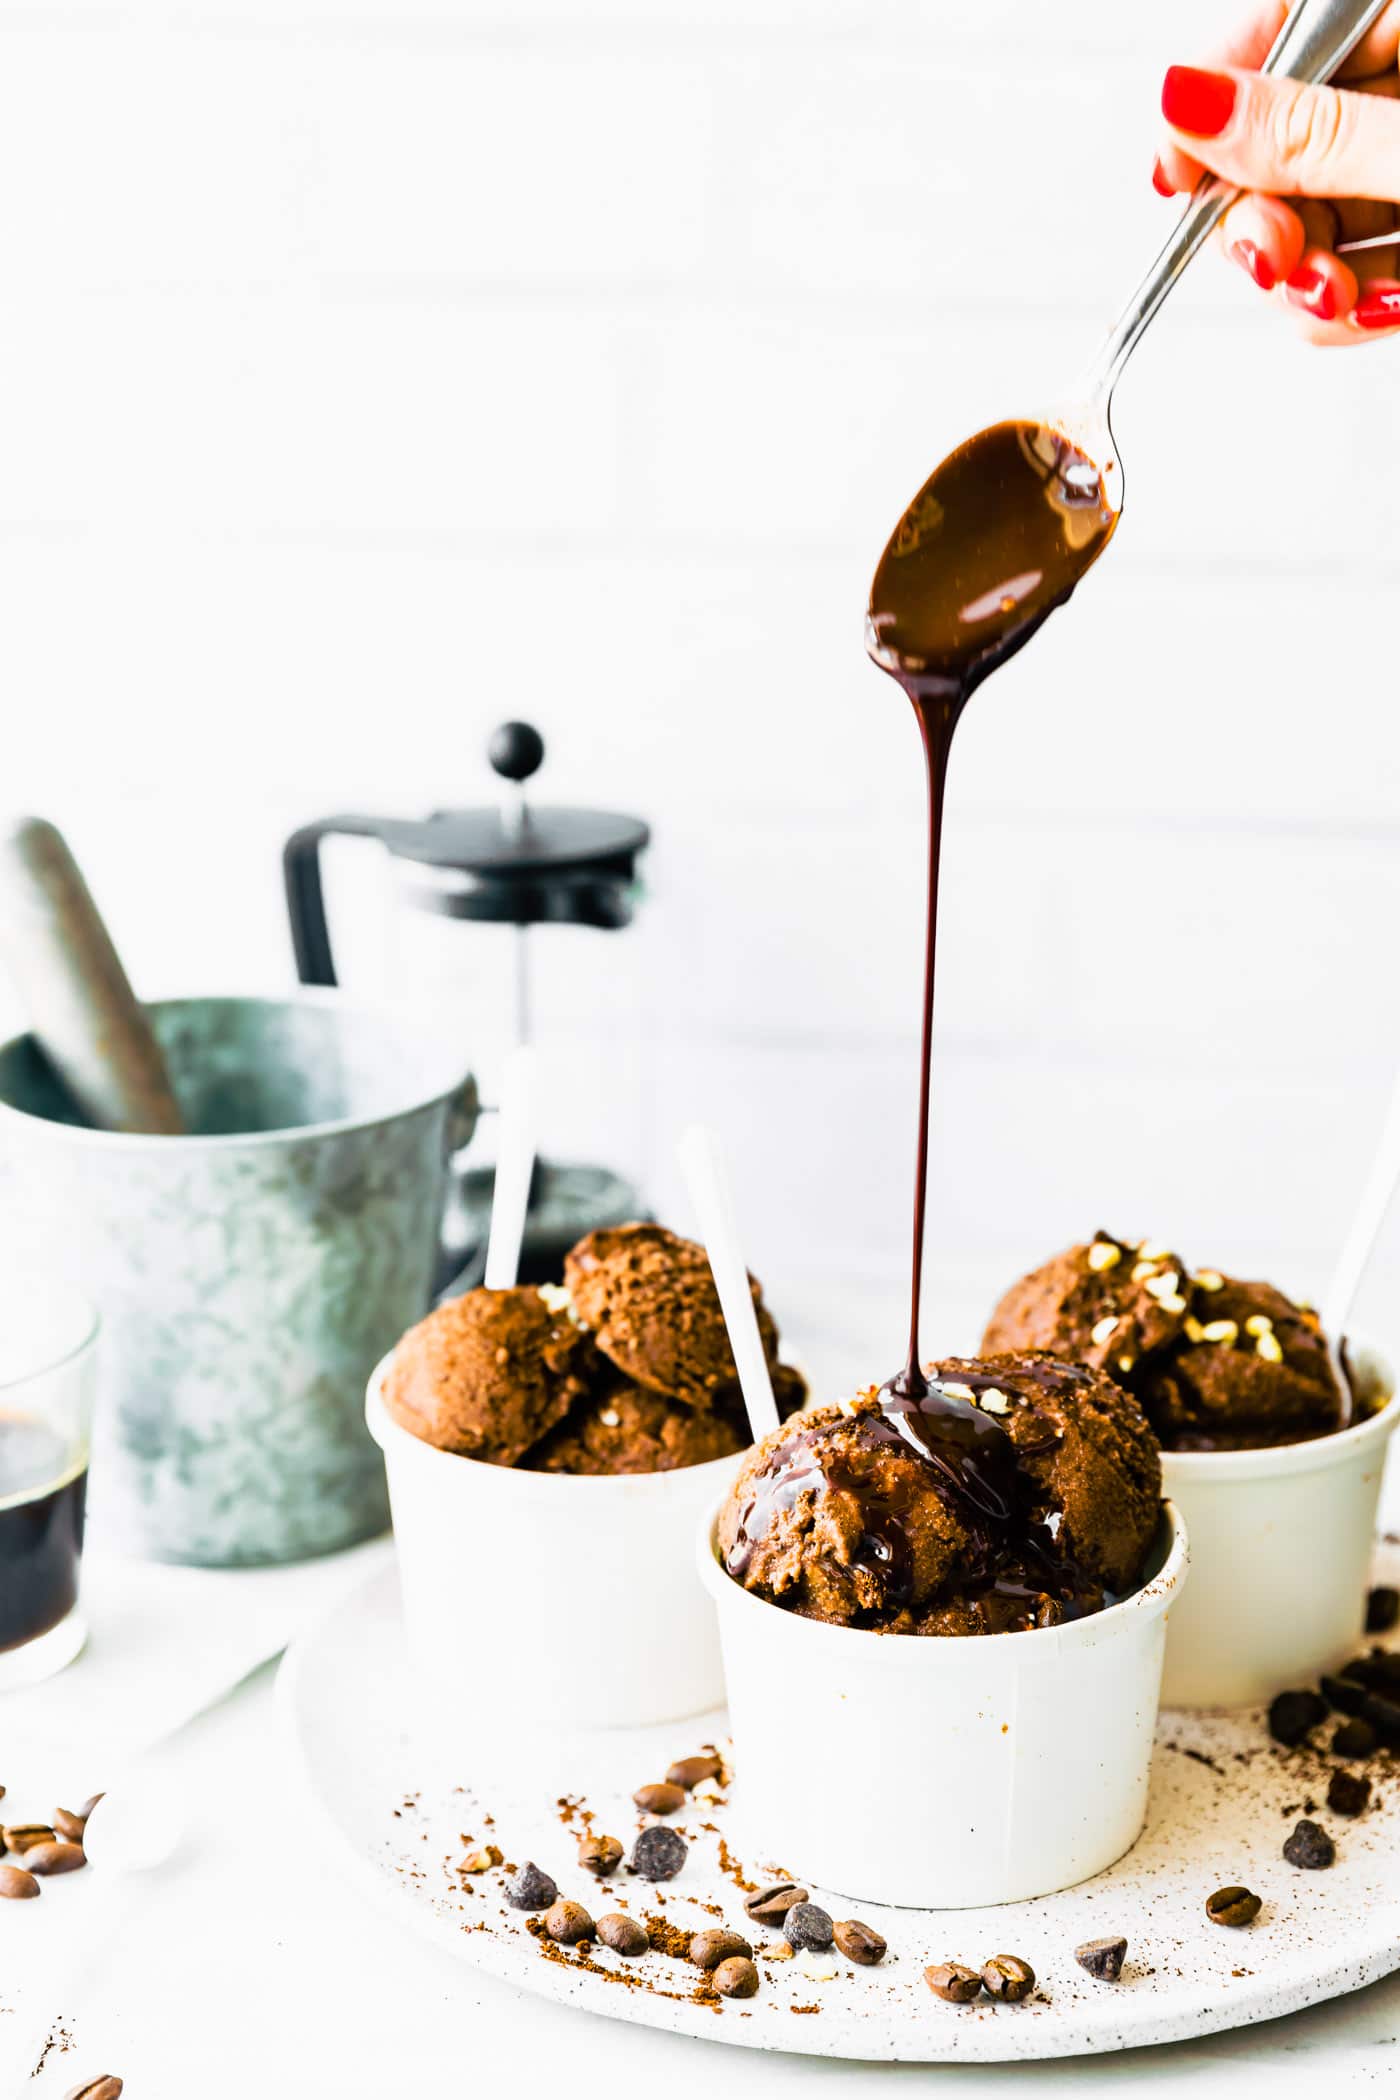 Melted dark chocolate being drizzled from spoon over double scoops of espresso dark chocolate sorbet in white paper bowls.